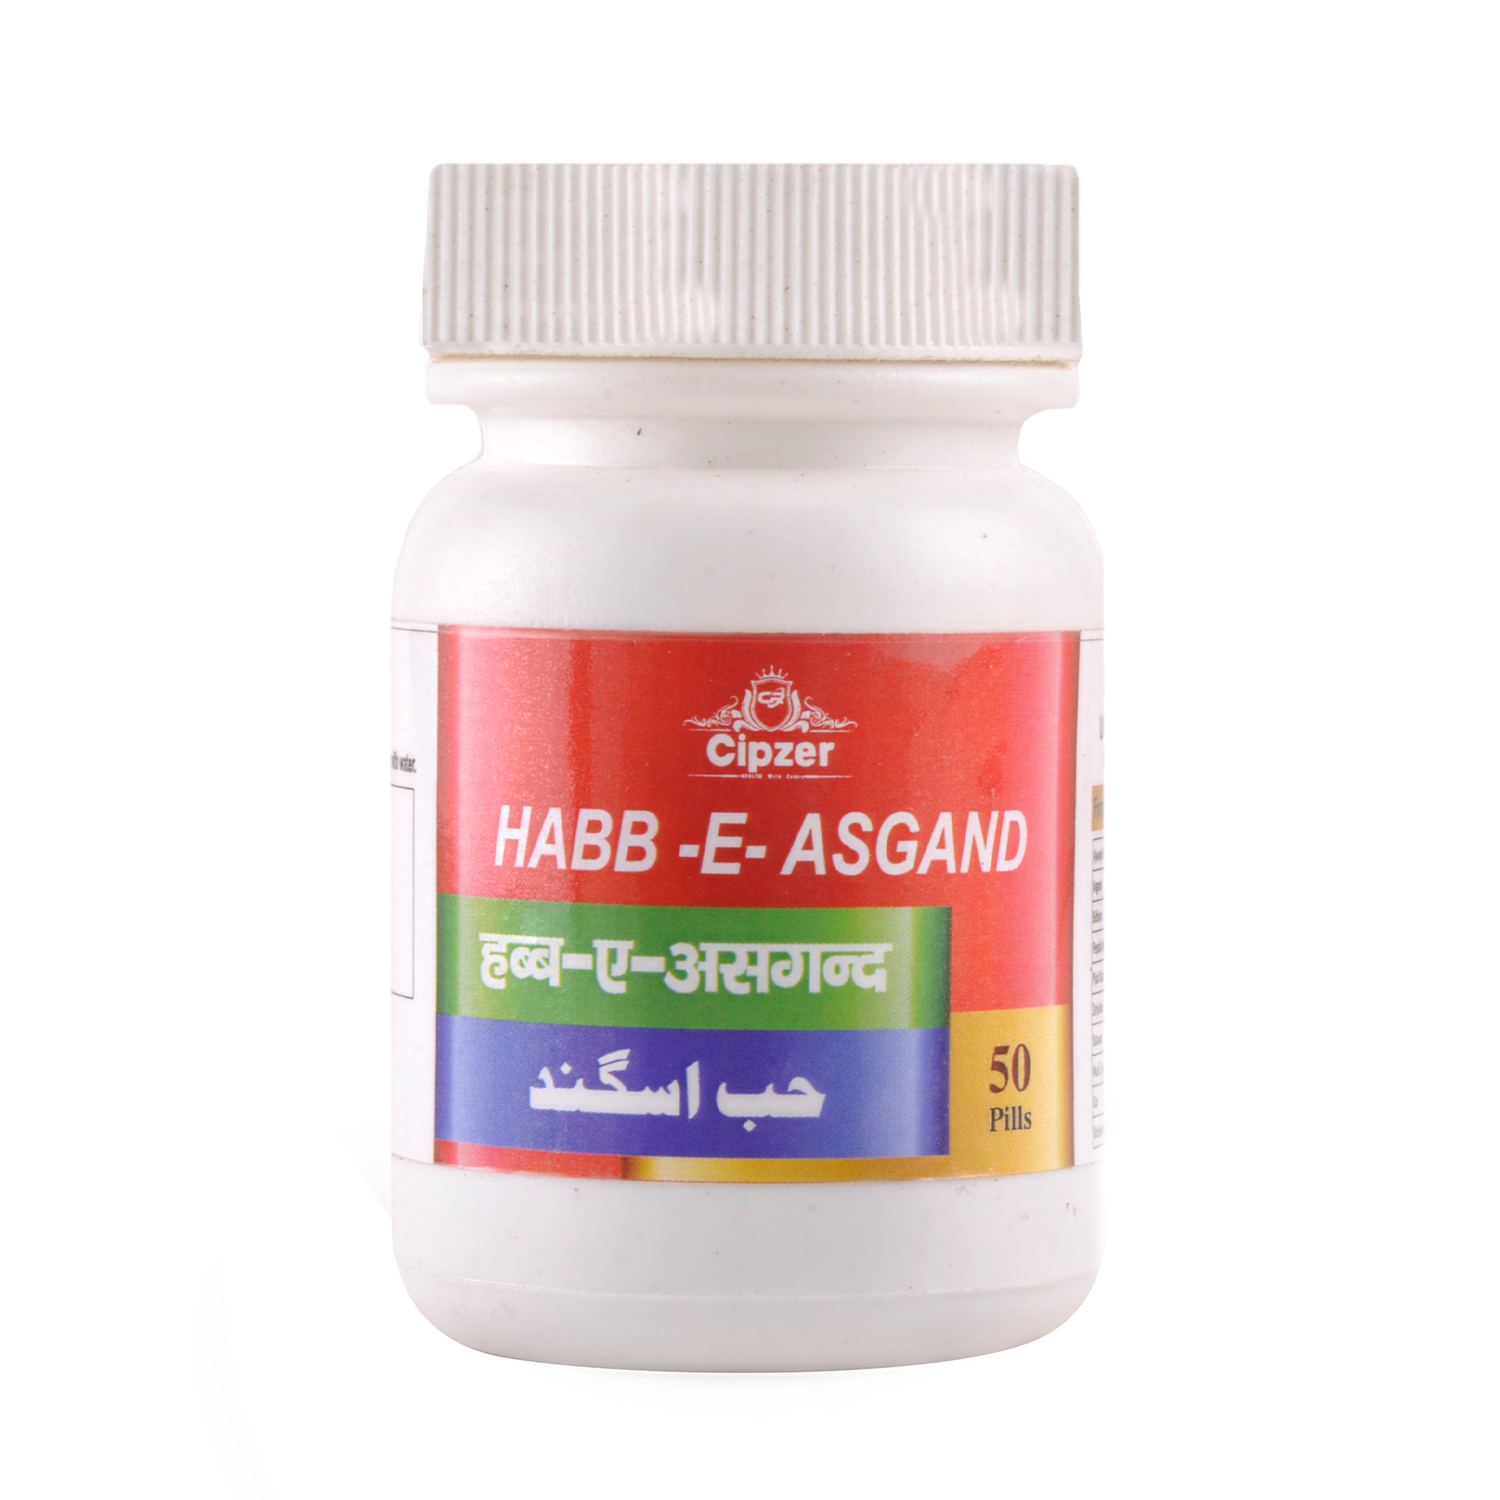 Buy Cipzer Habb-e-Asgand at Best Price Online